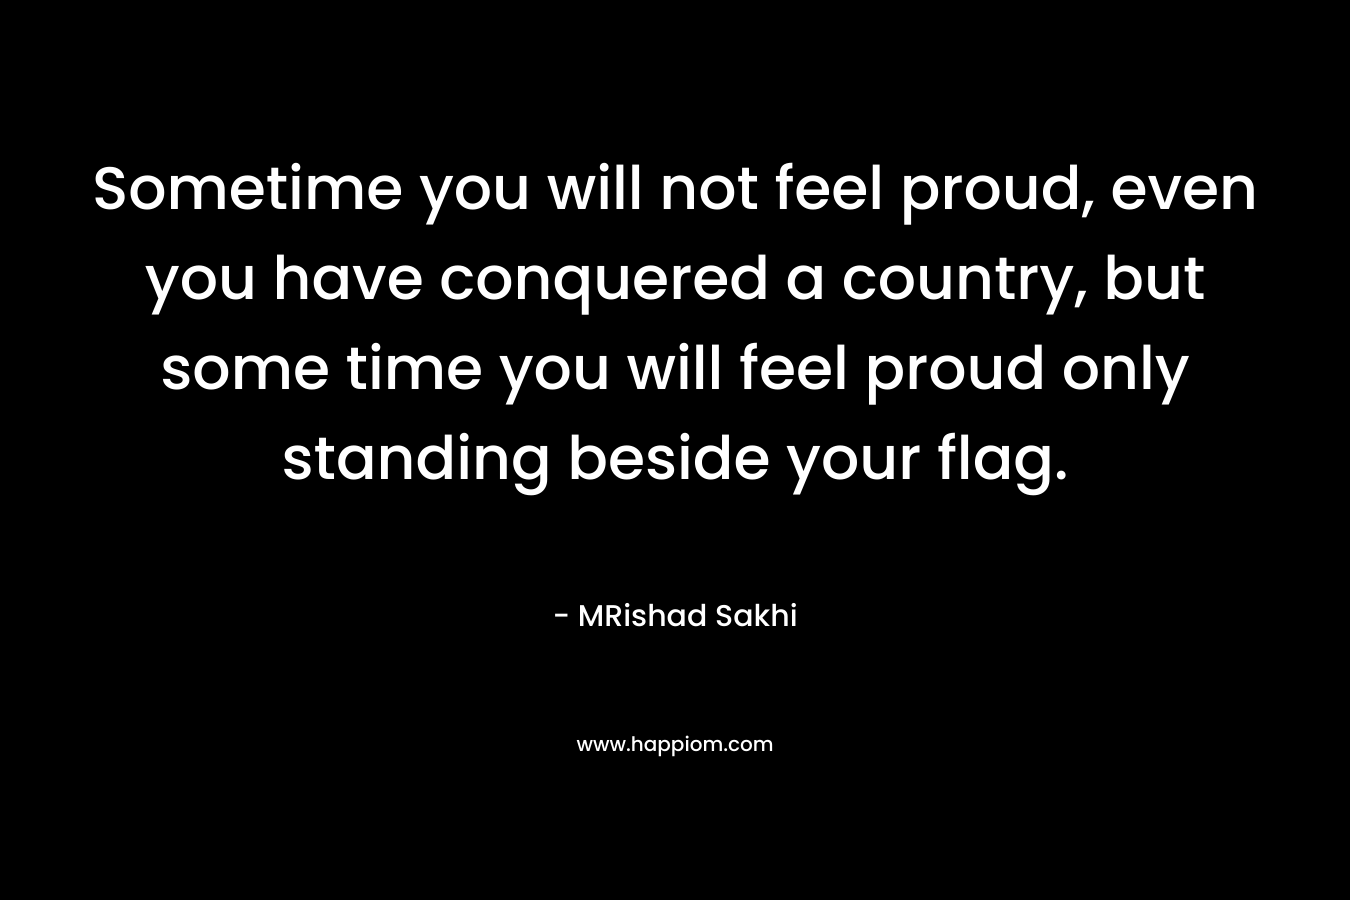 Sometime you will not feel proud, even you have conquered a country, but some time you will feel proud only standing beside your flag. – MRishad Sakhi